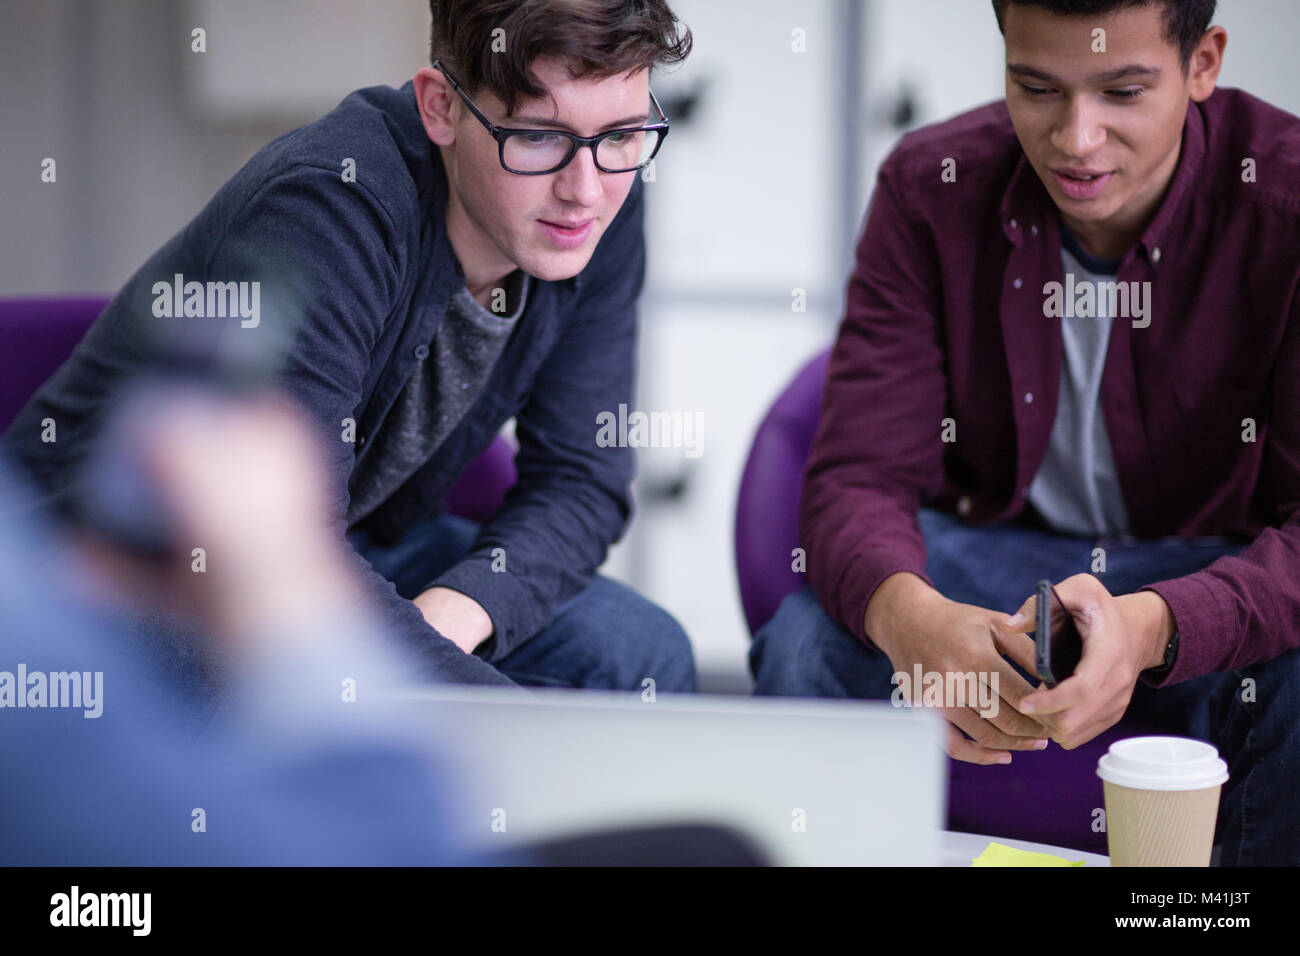 Male students working together Stock Photo